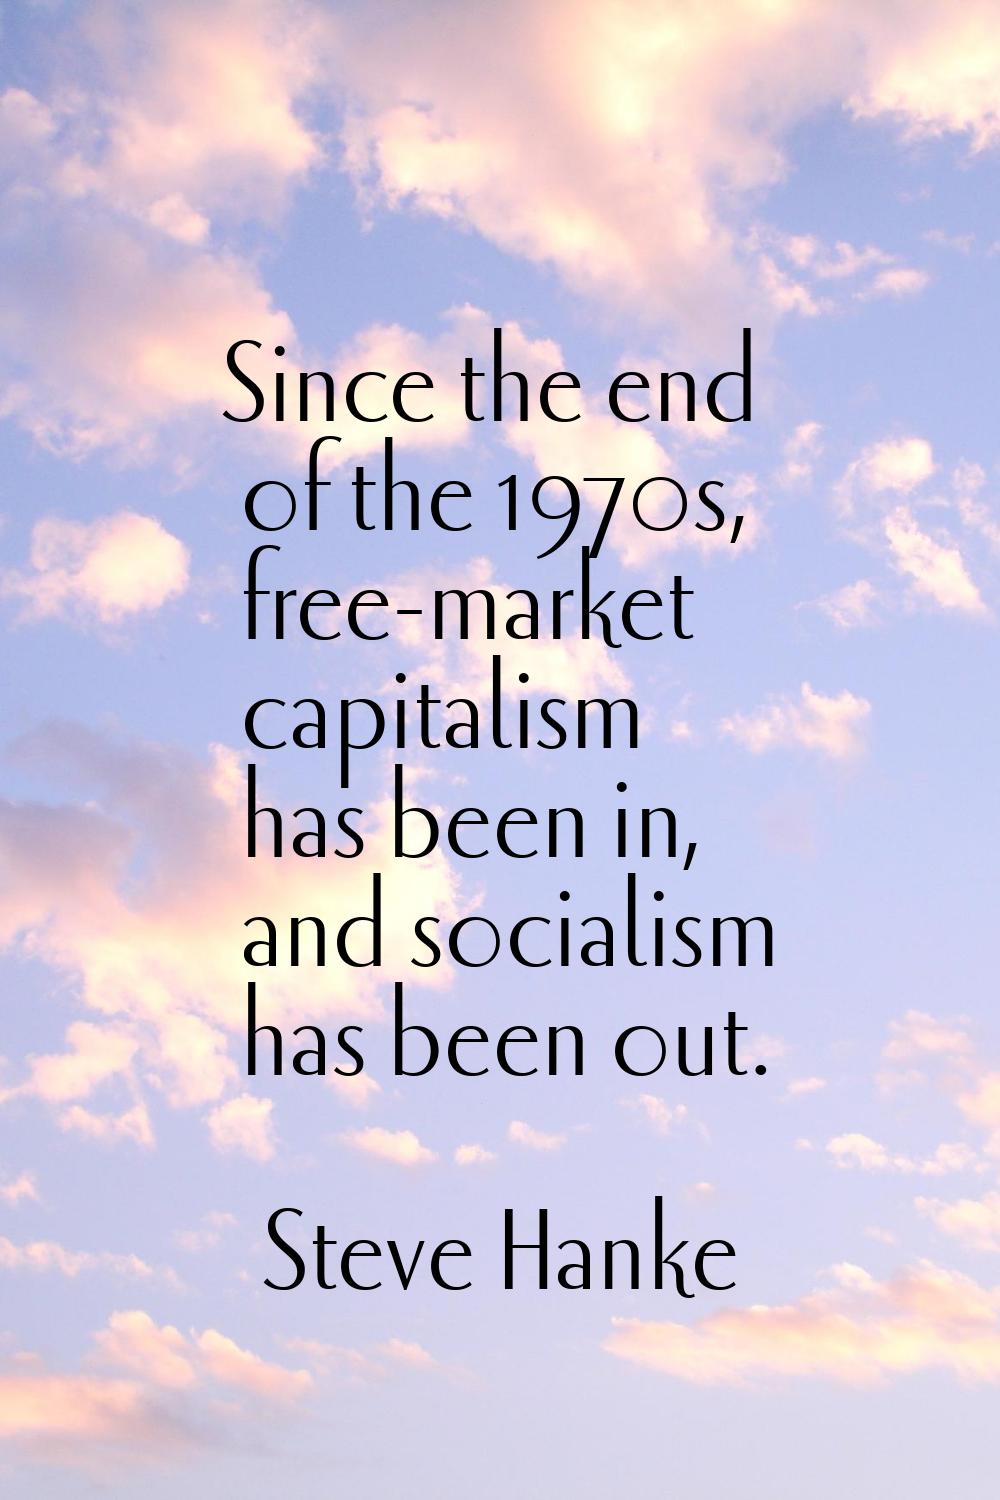 Since the end of the 1970s, free-market capitalism has been in, and socialism has been out.